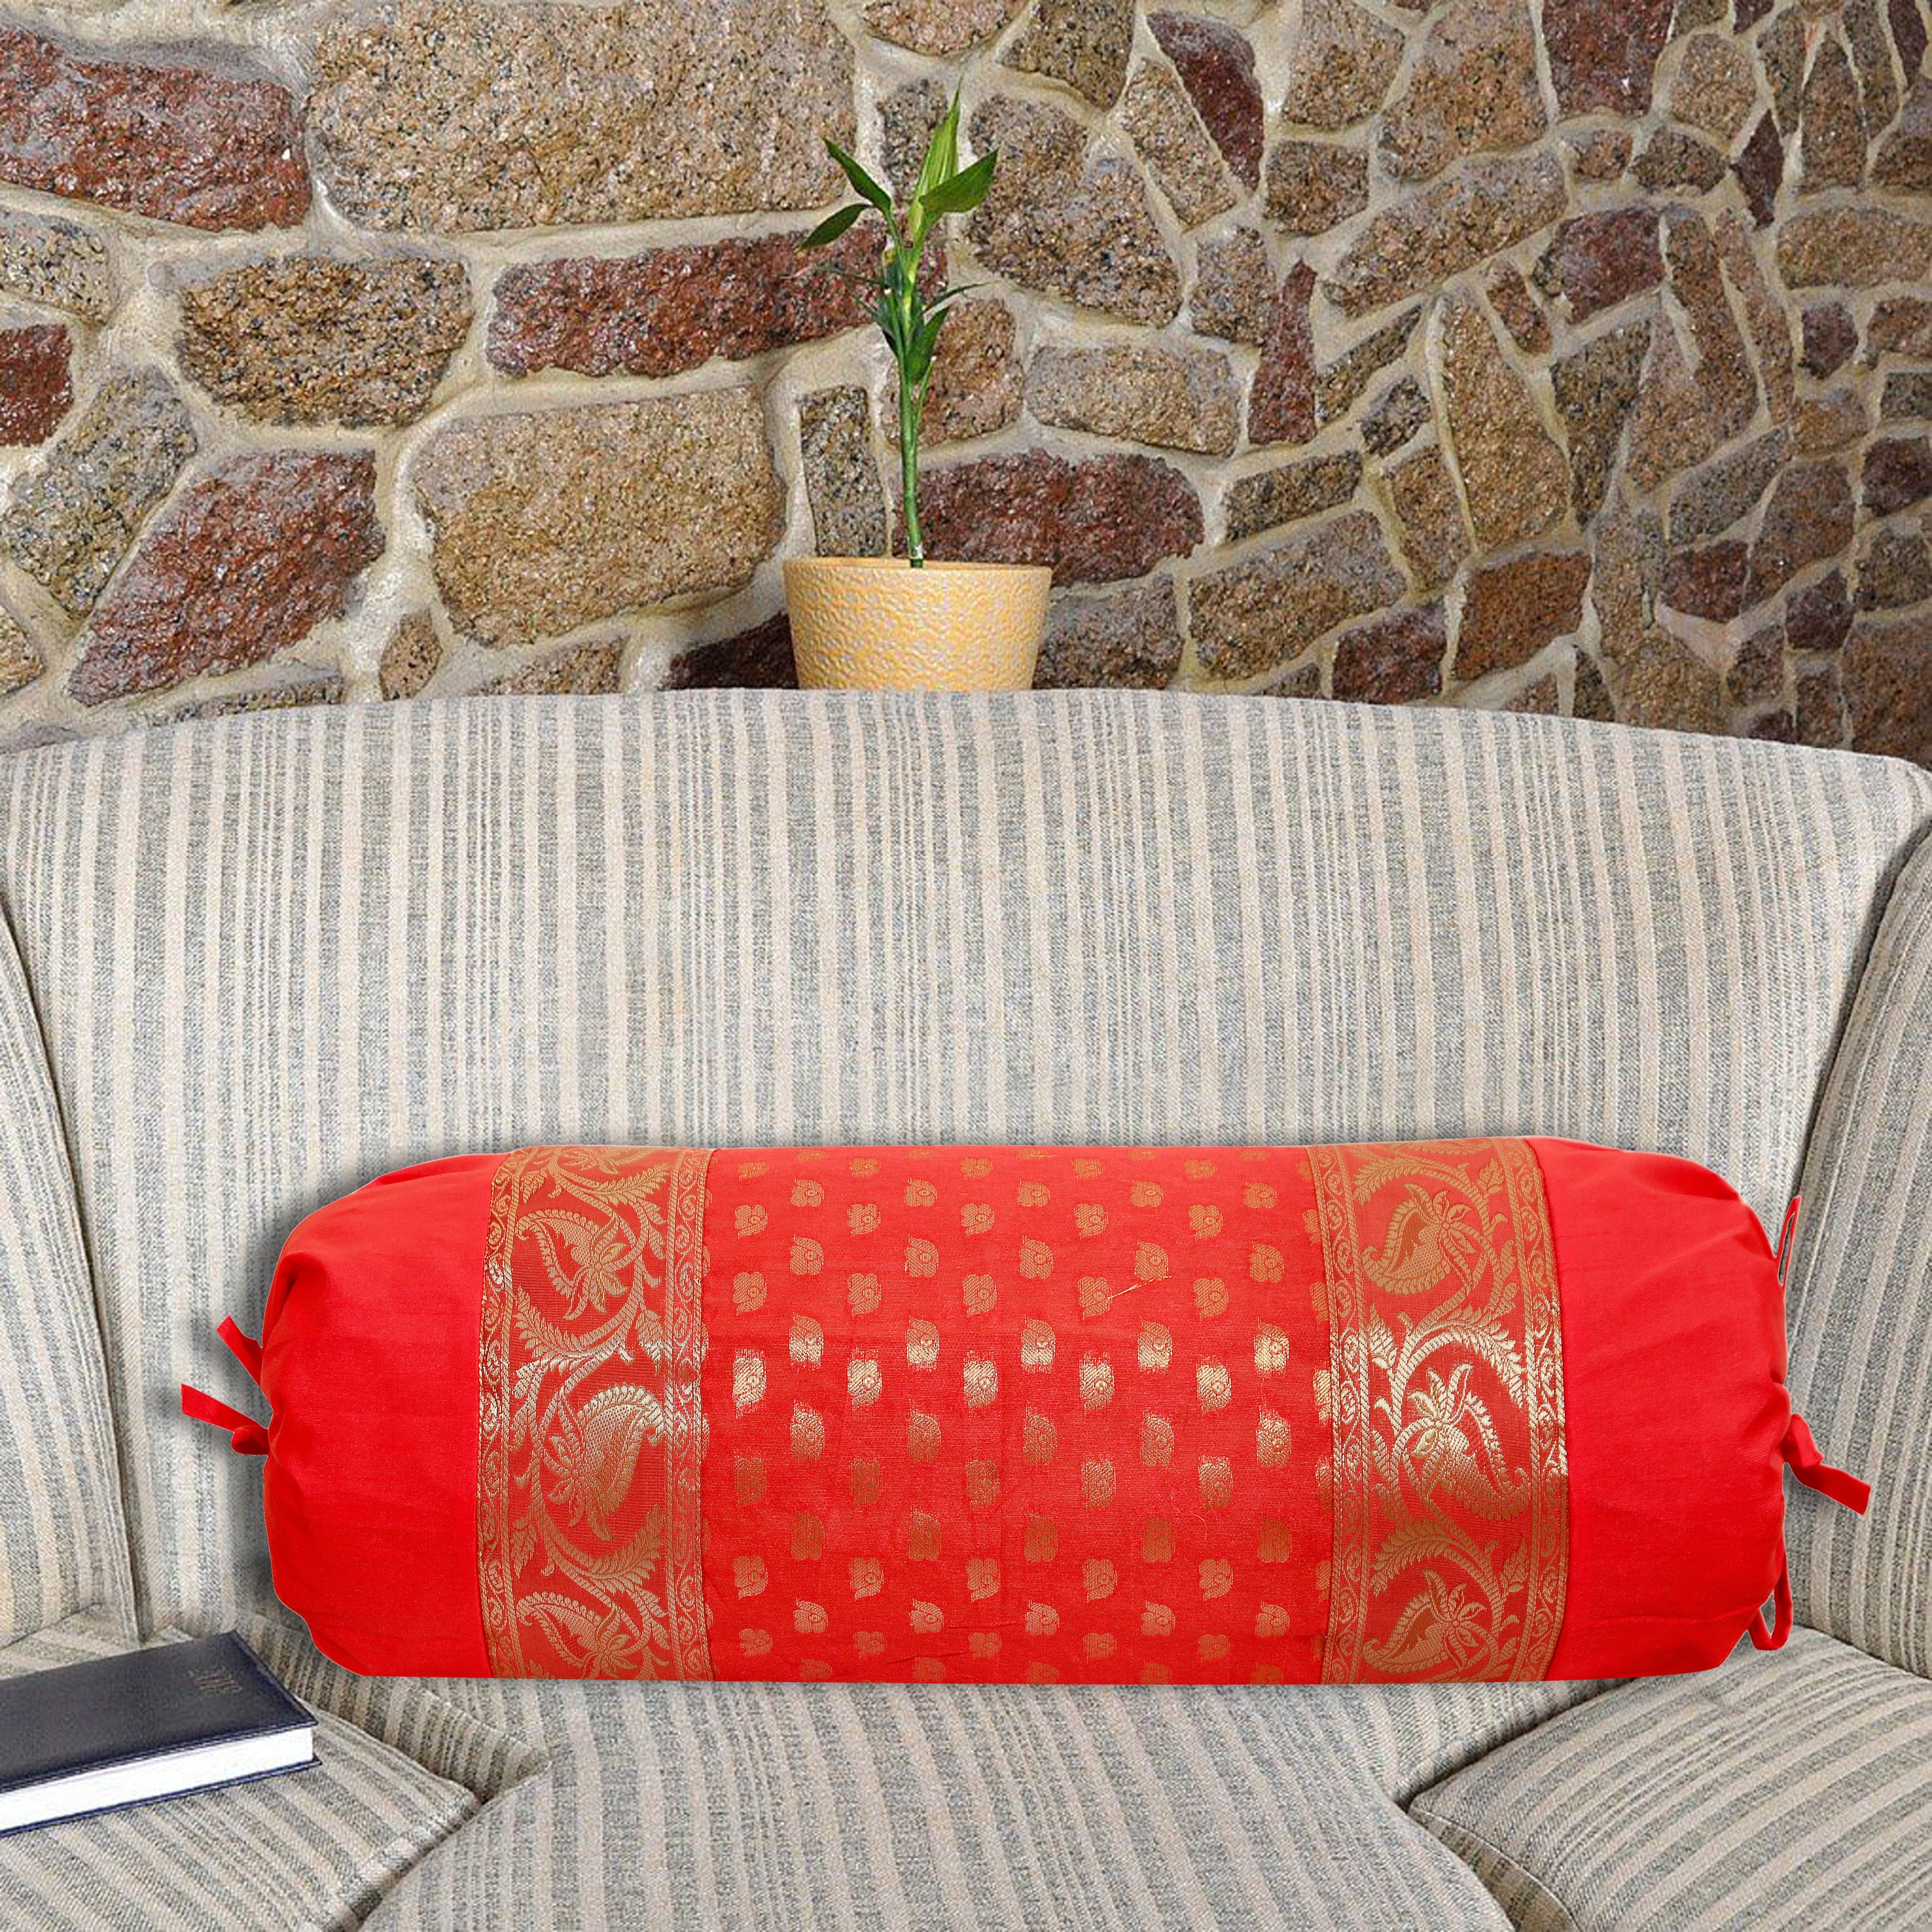 Indian Silk Fabric Neck Roll Round Bolster Cushion Cover Gift Item 30 x 15 Inch 